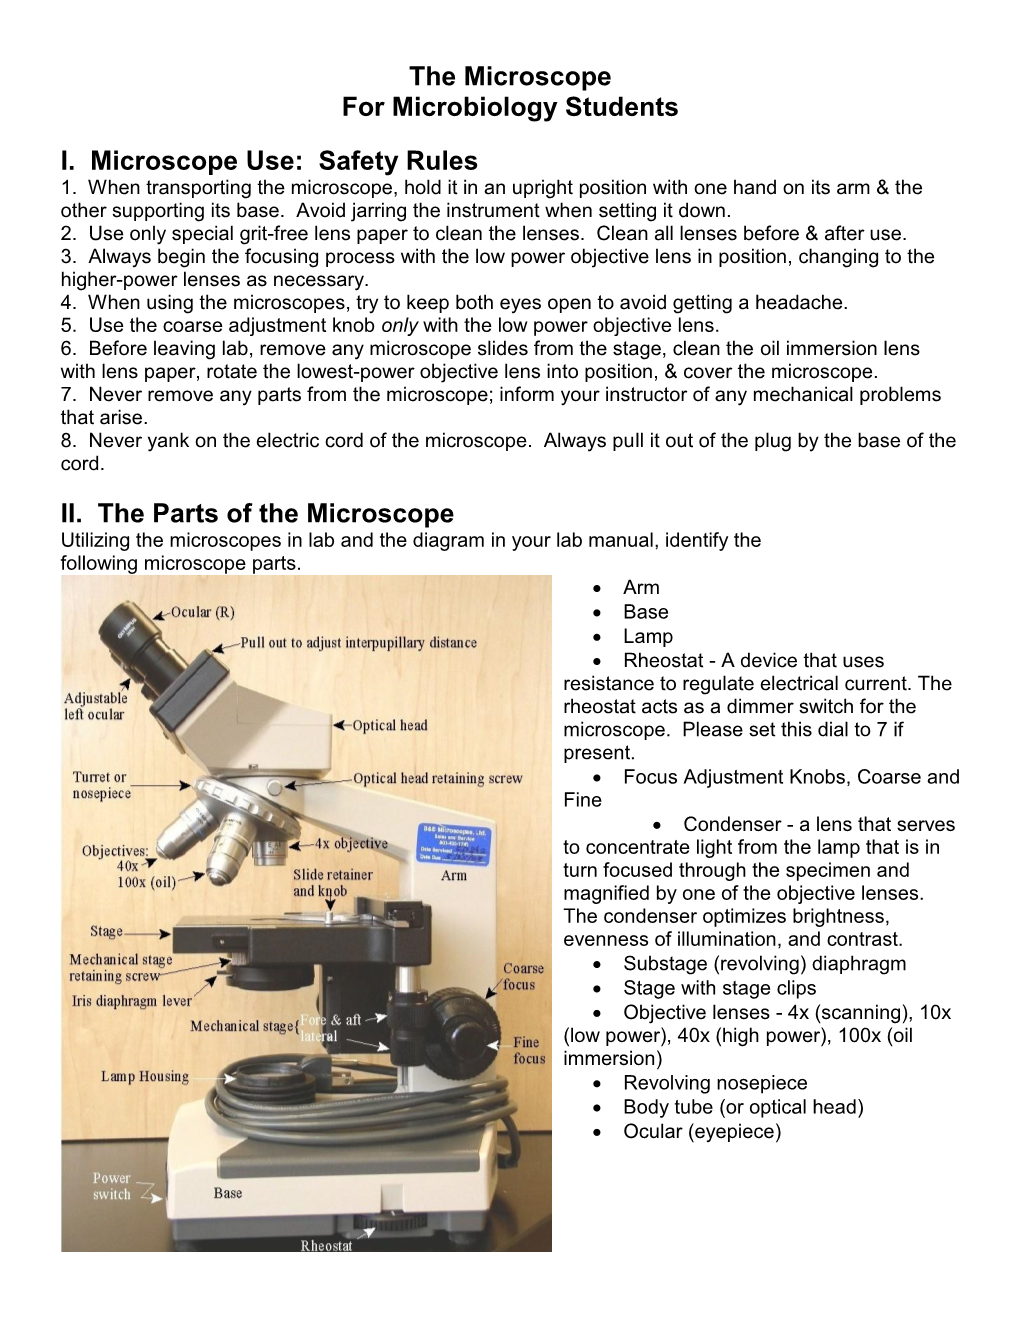 The Microscope for Microbiology Students